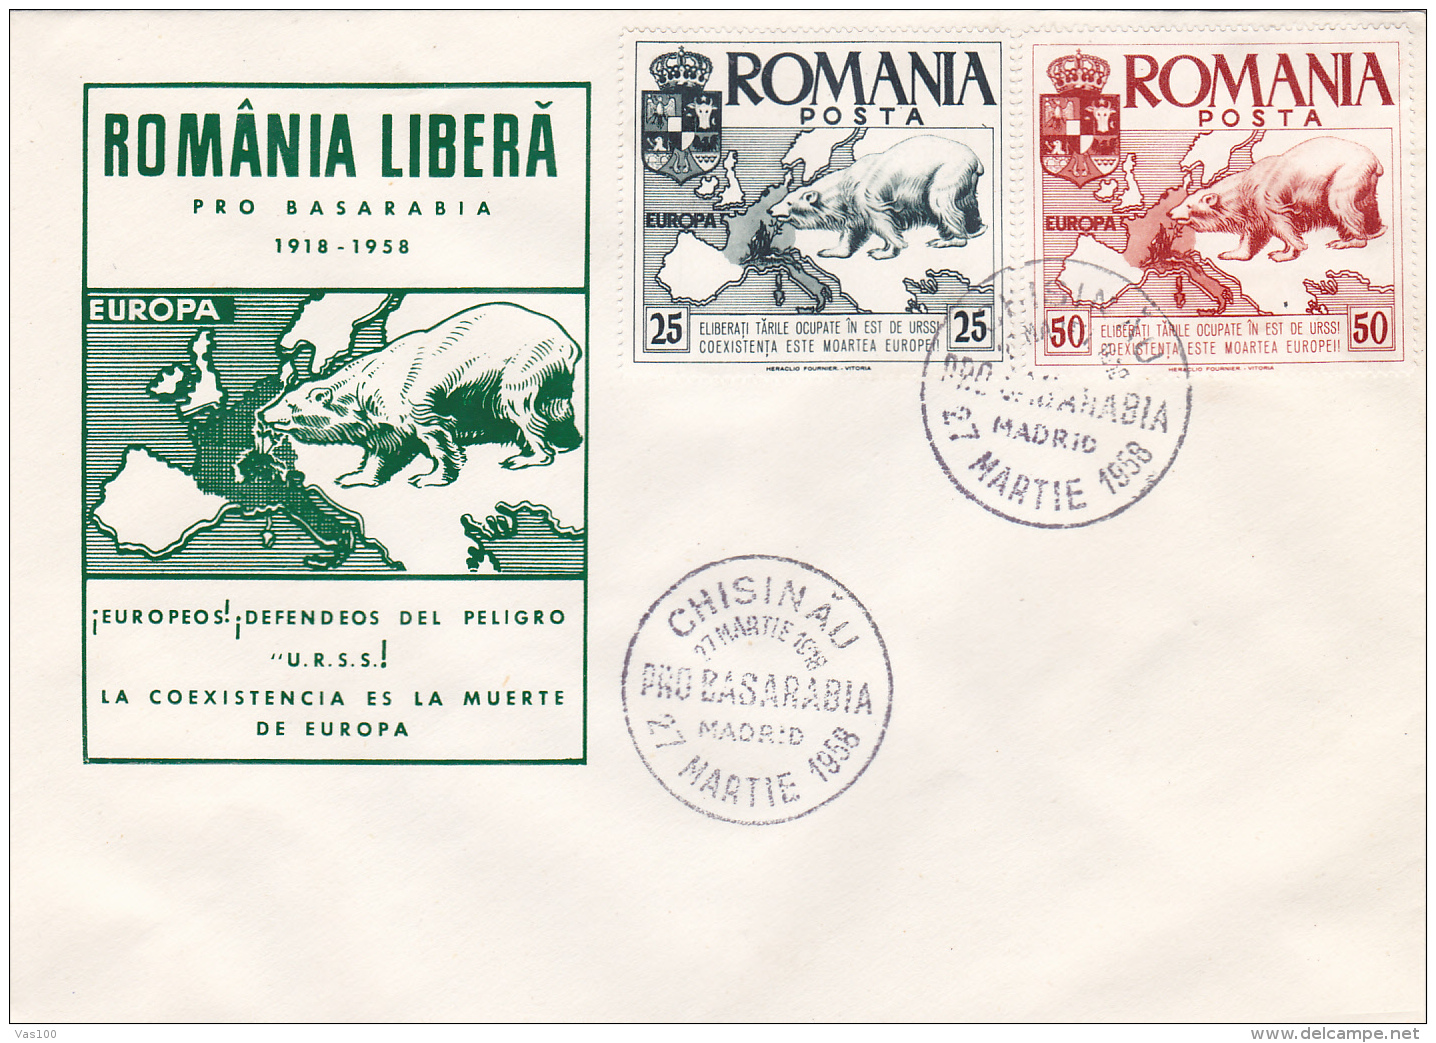 #T83  EUROPA CEPT, BEAR, DANTELES STAMPS,  COVER FDC, 1958, SPAIN EXIL, ROMANIA. - FDC